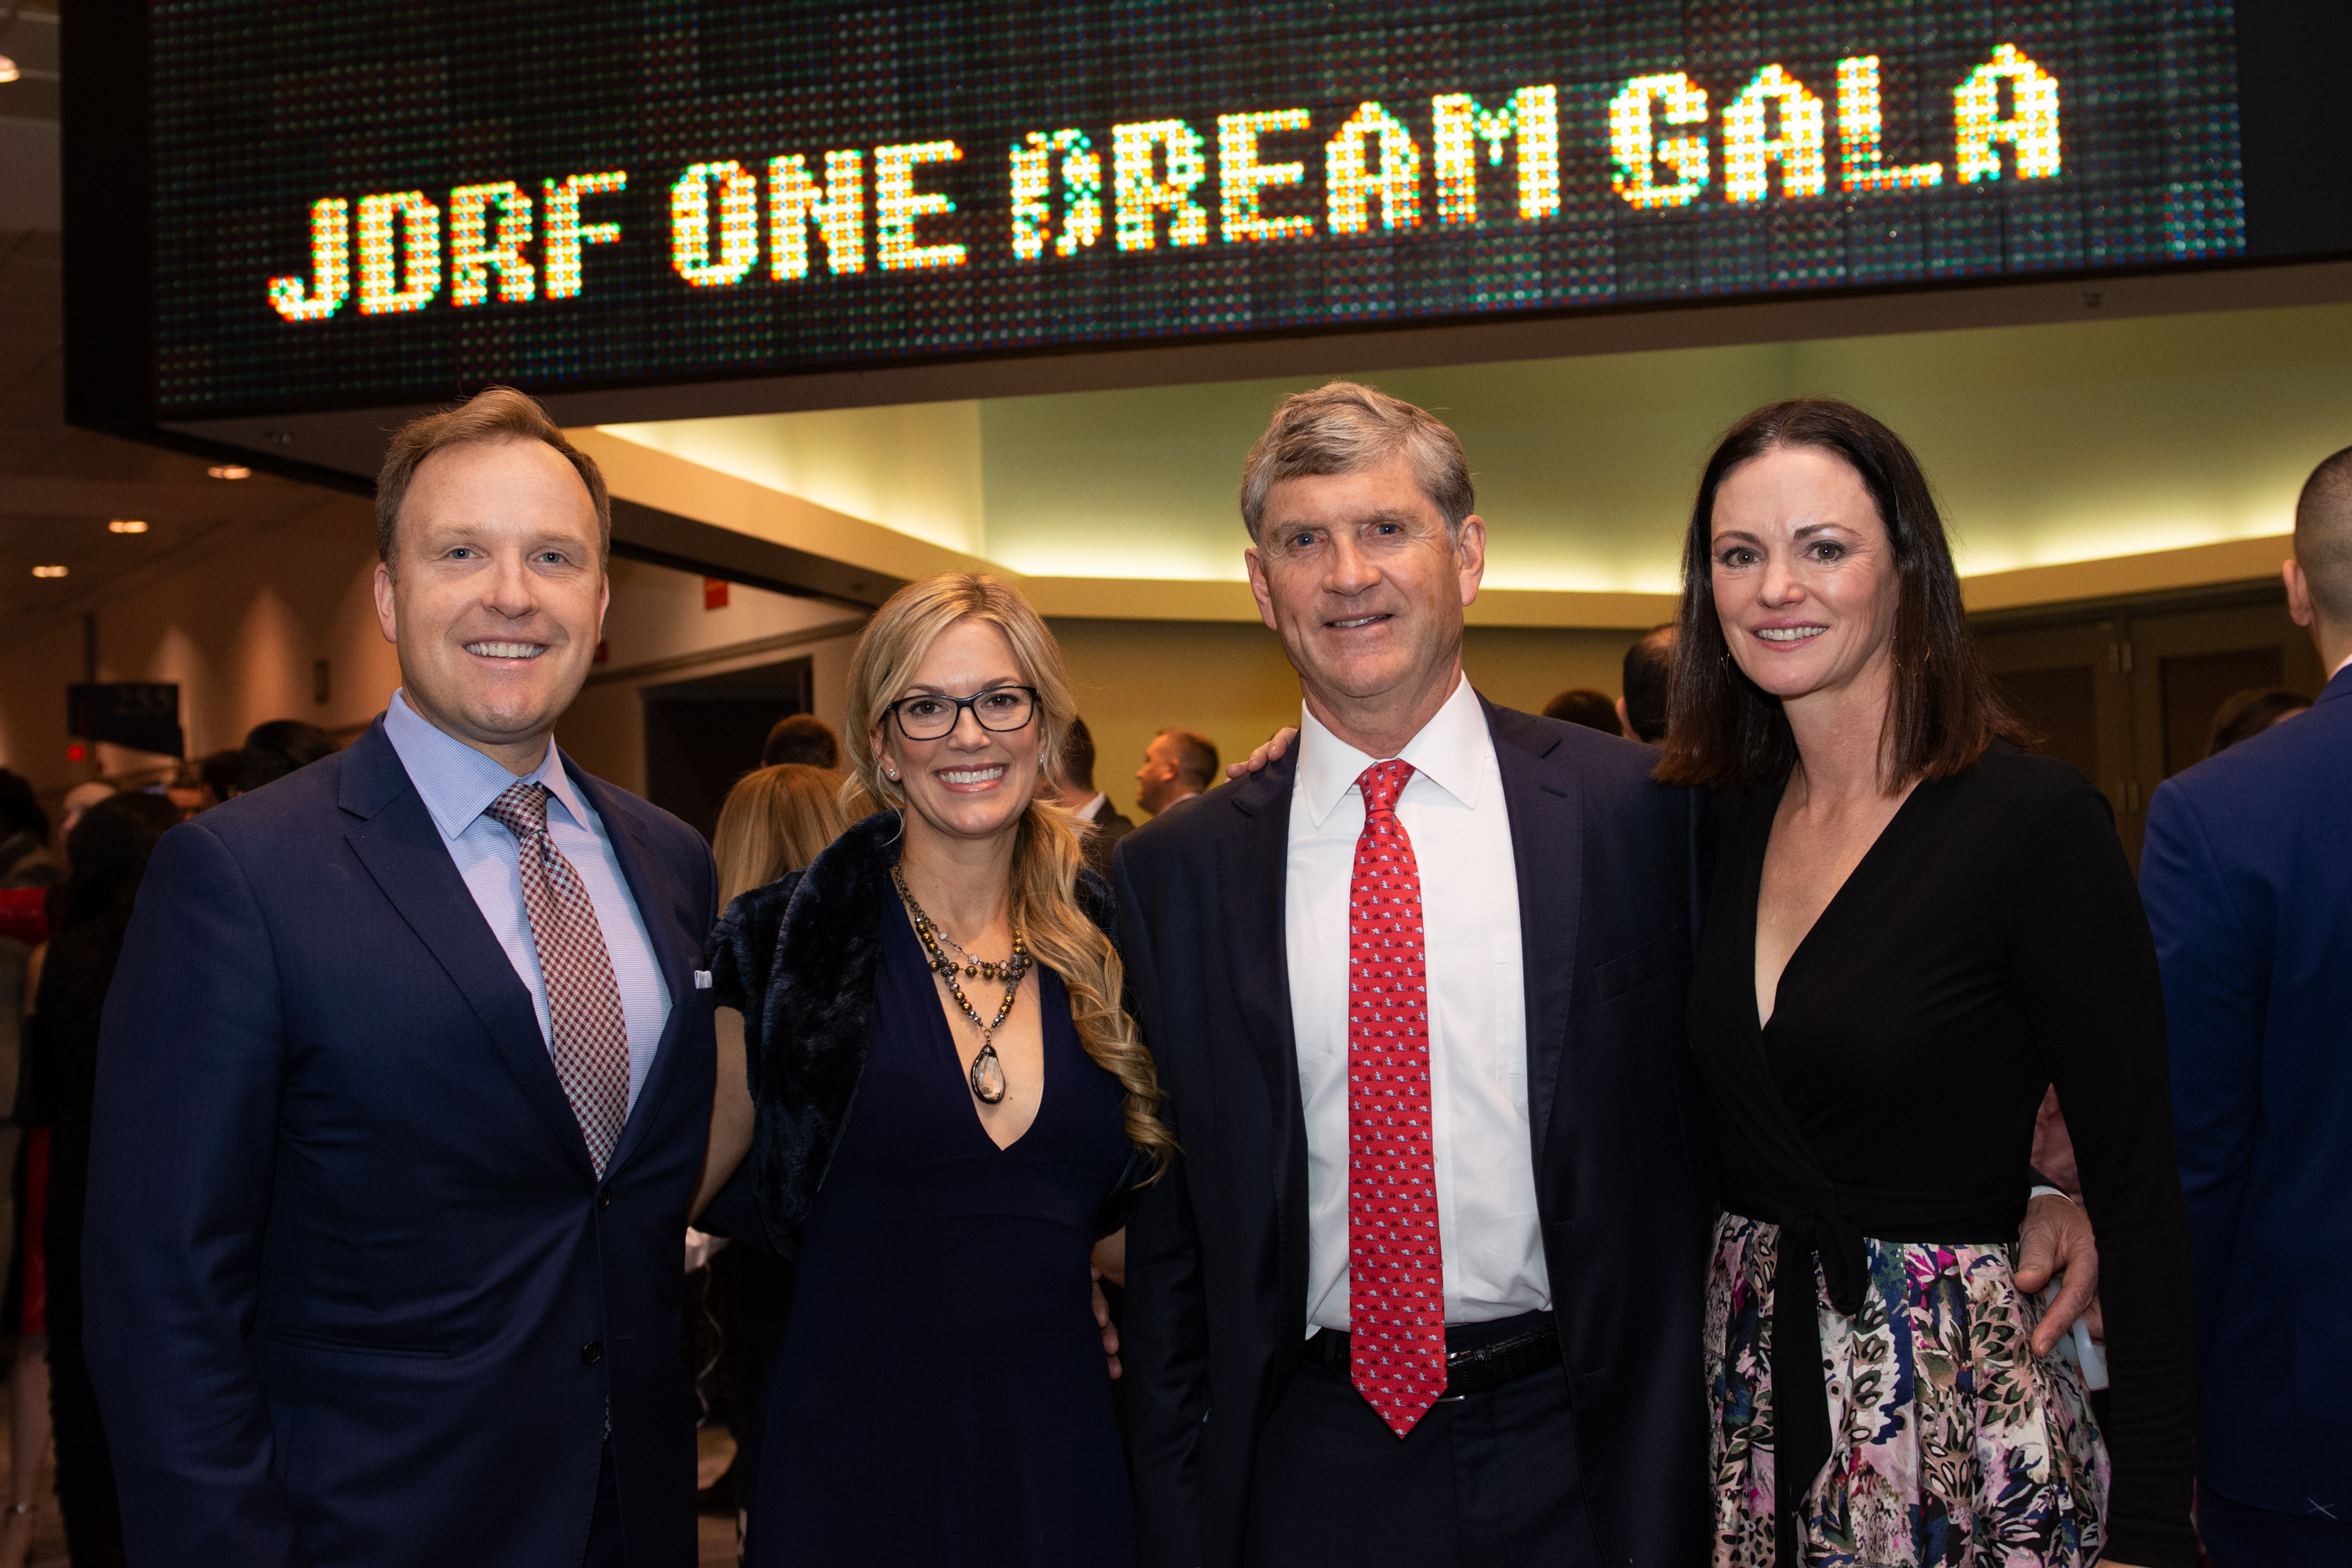 2019 JDRF Illinois One Dream Gala Co-Chairs David and Carrie Carlson